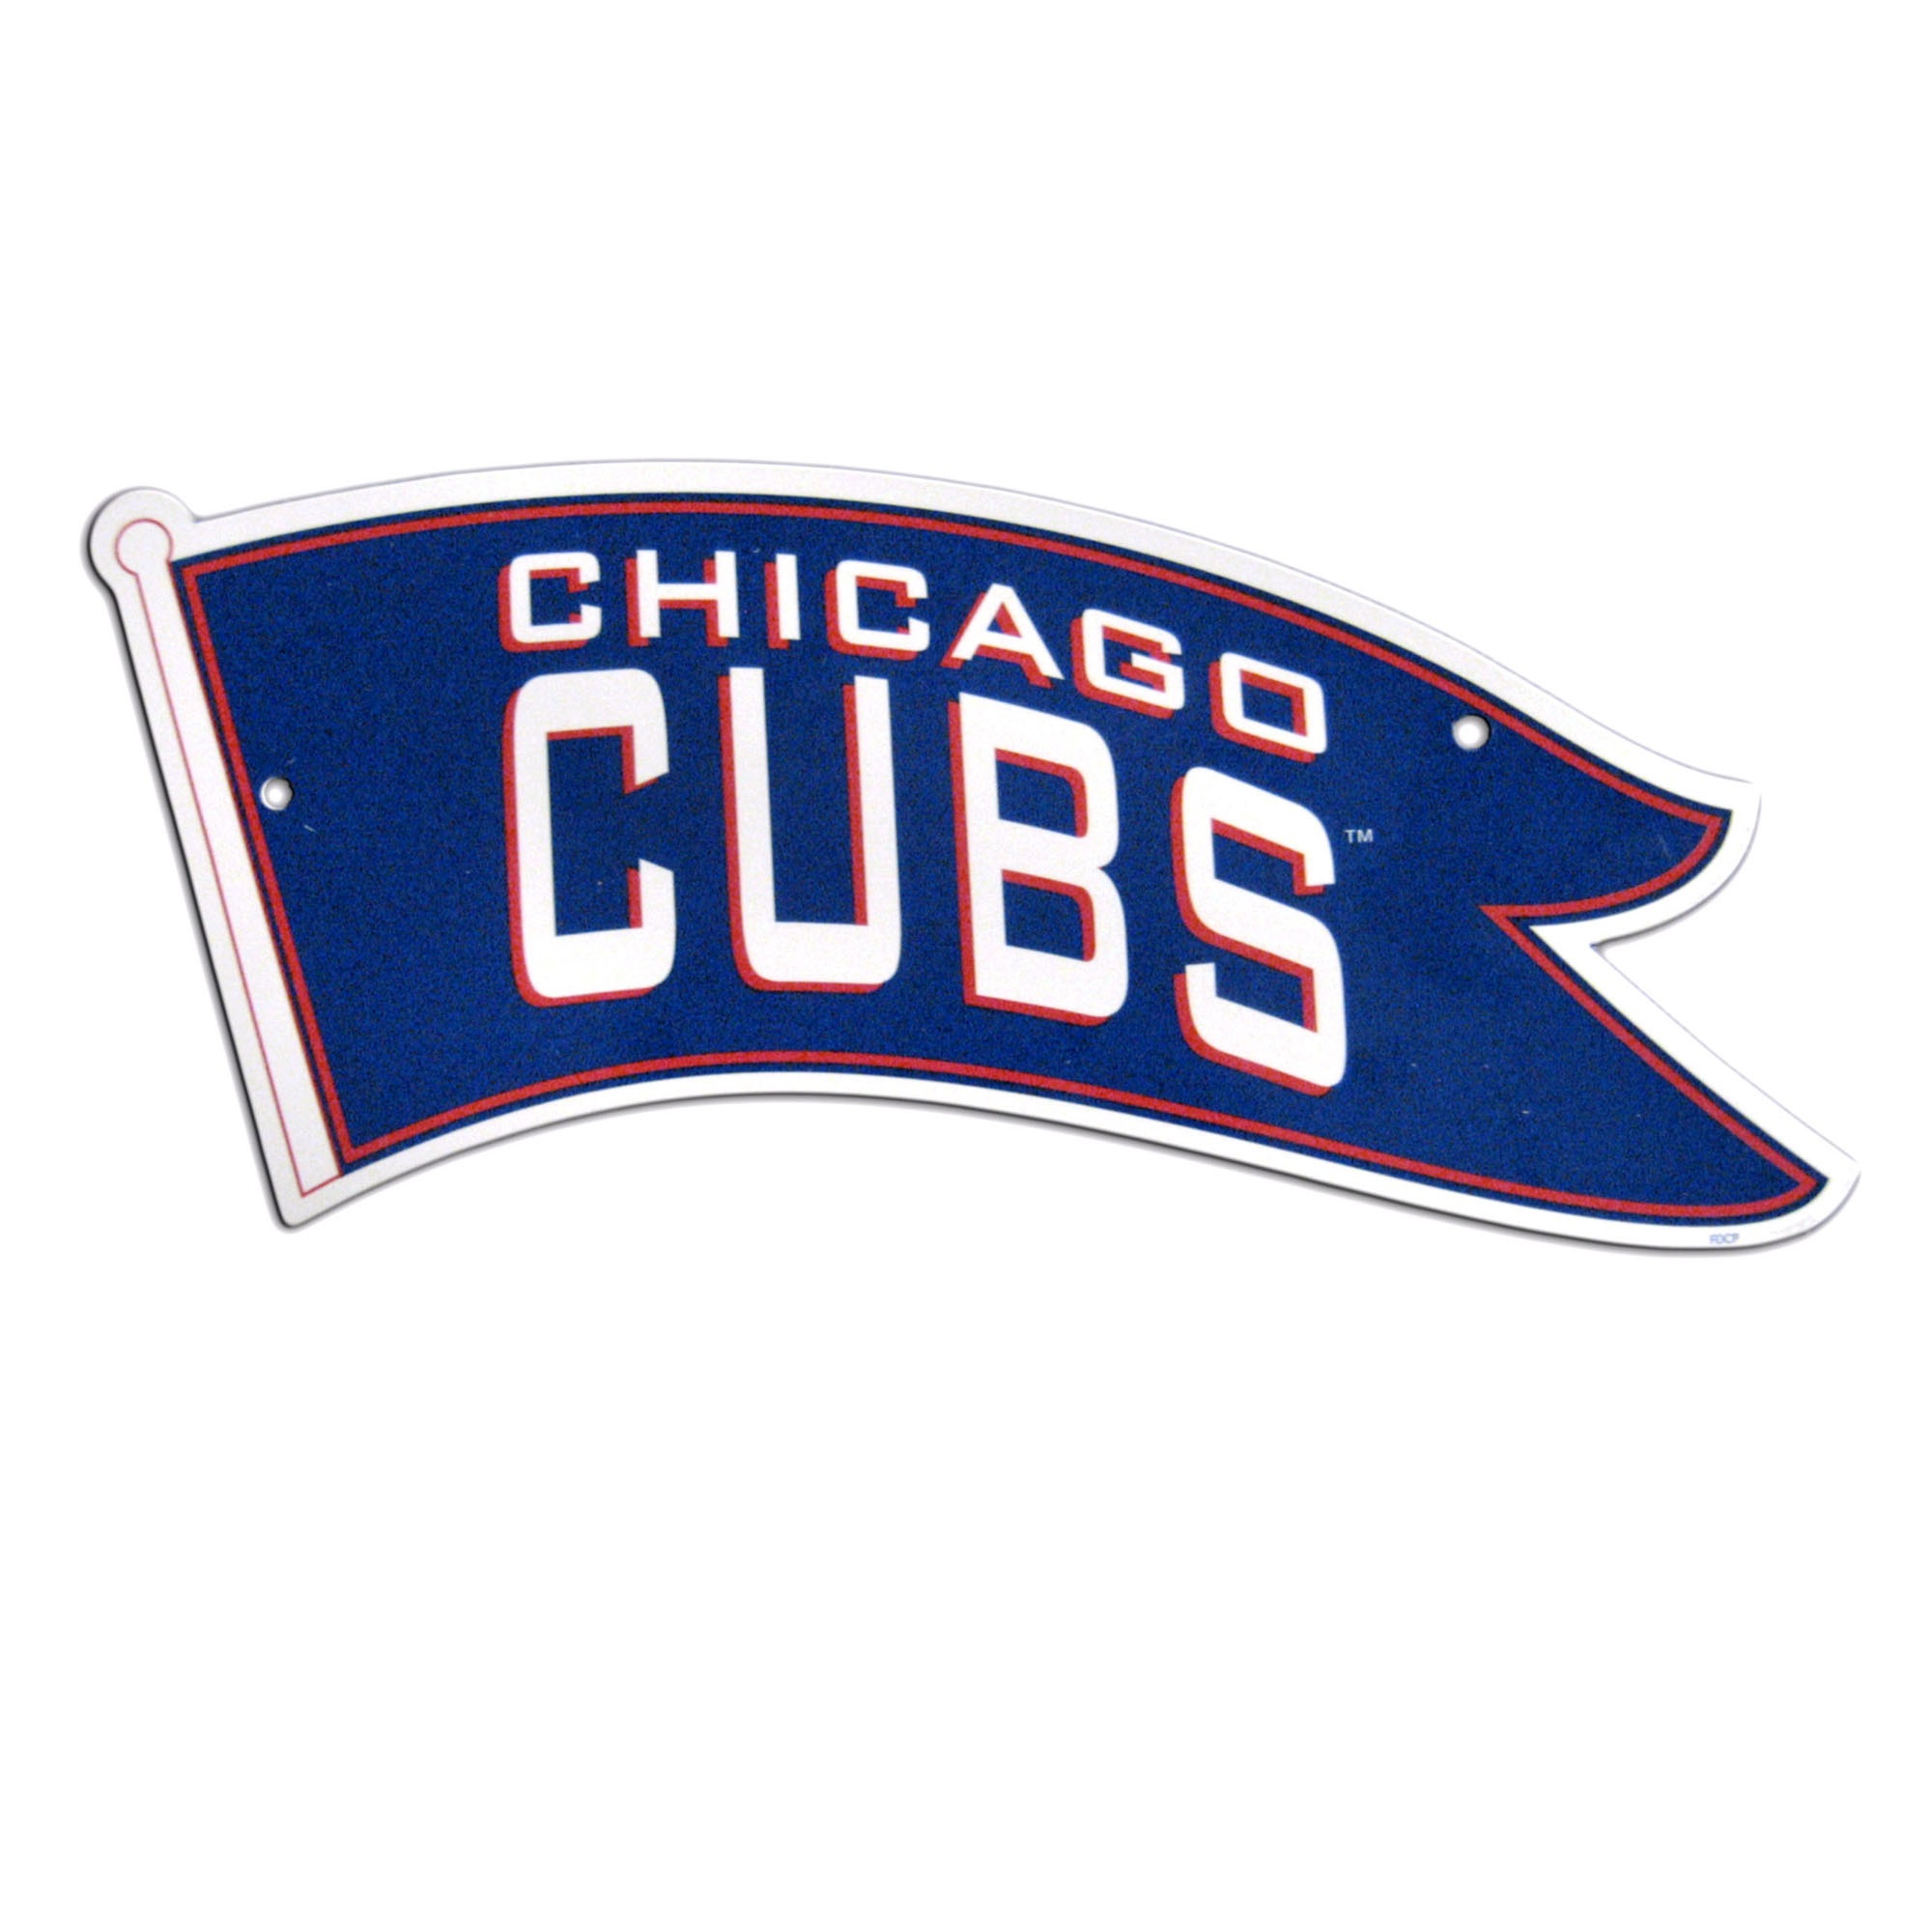 Chicago Cubs Sign 12x18 Plastic CO